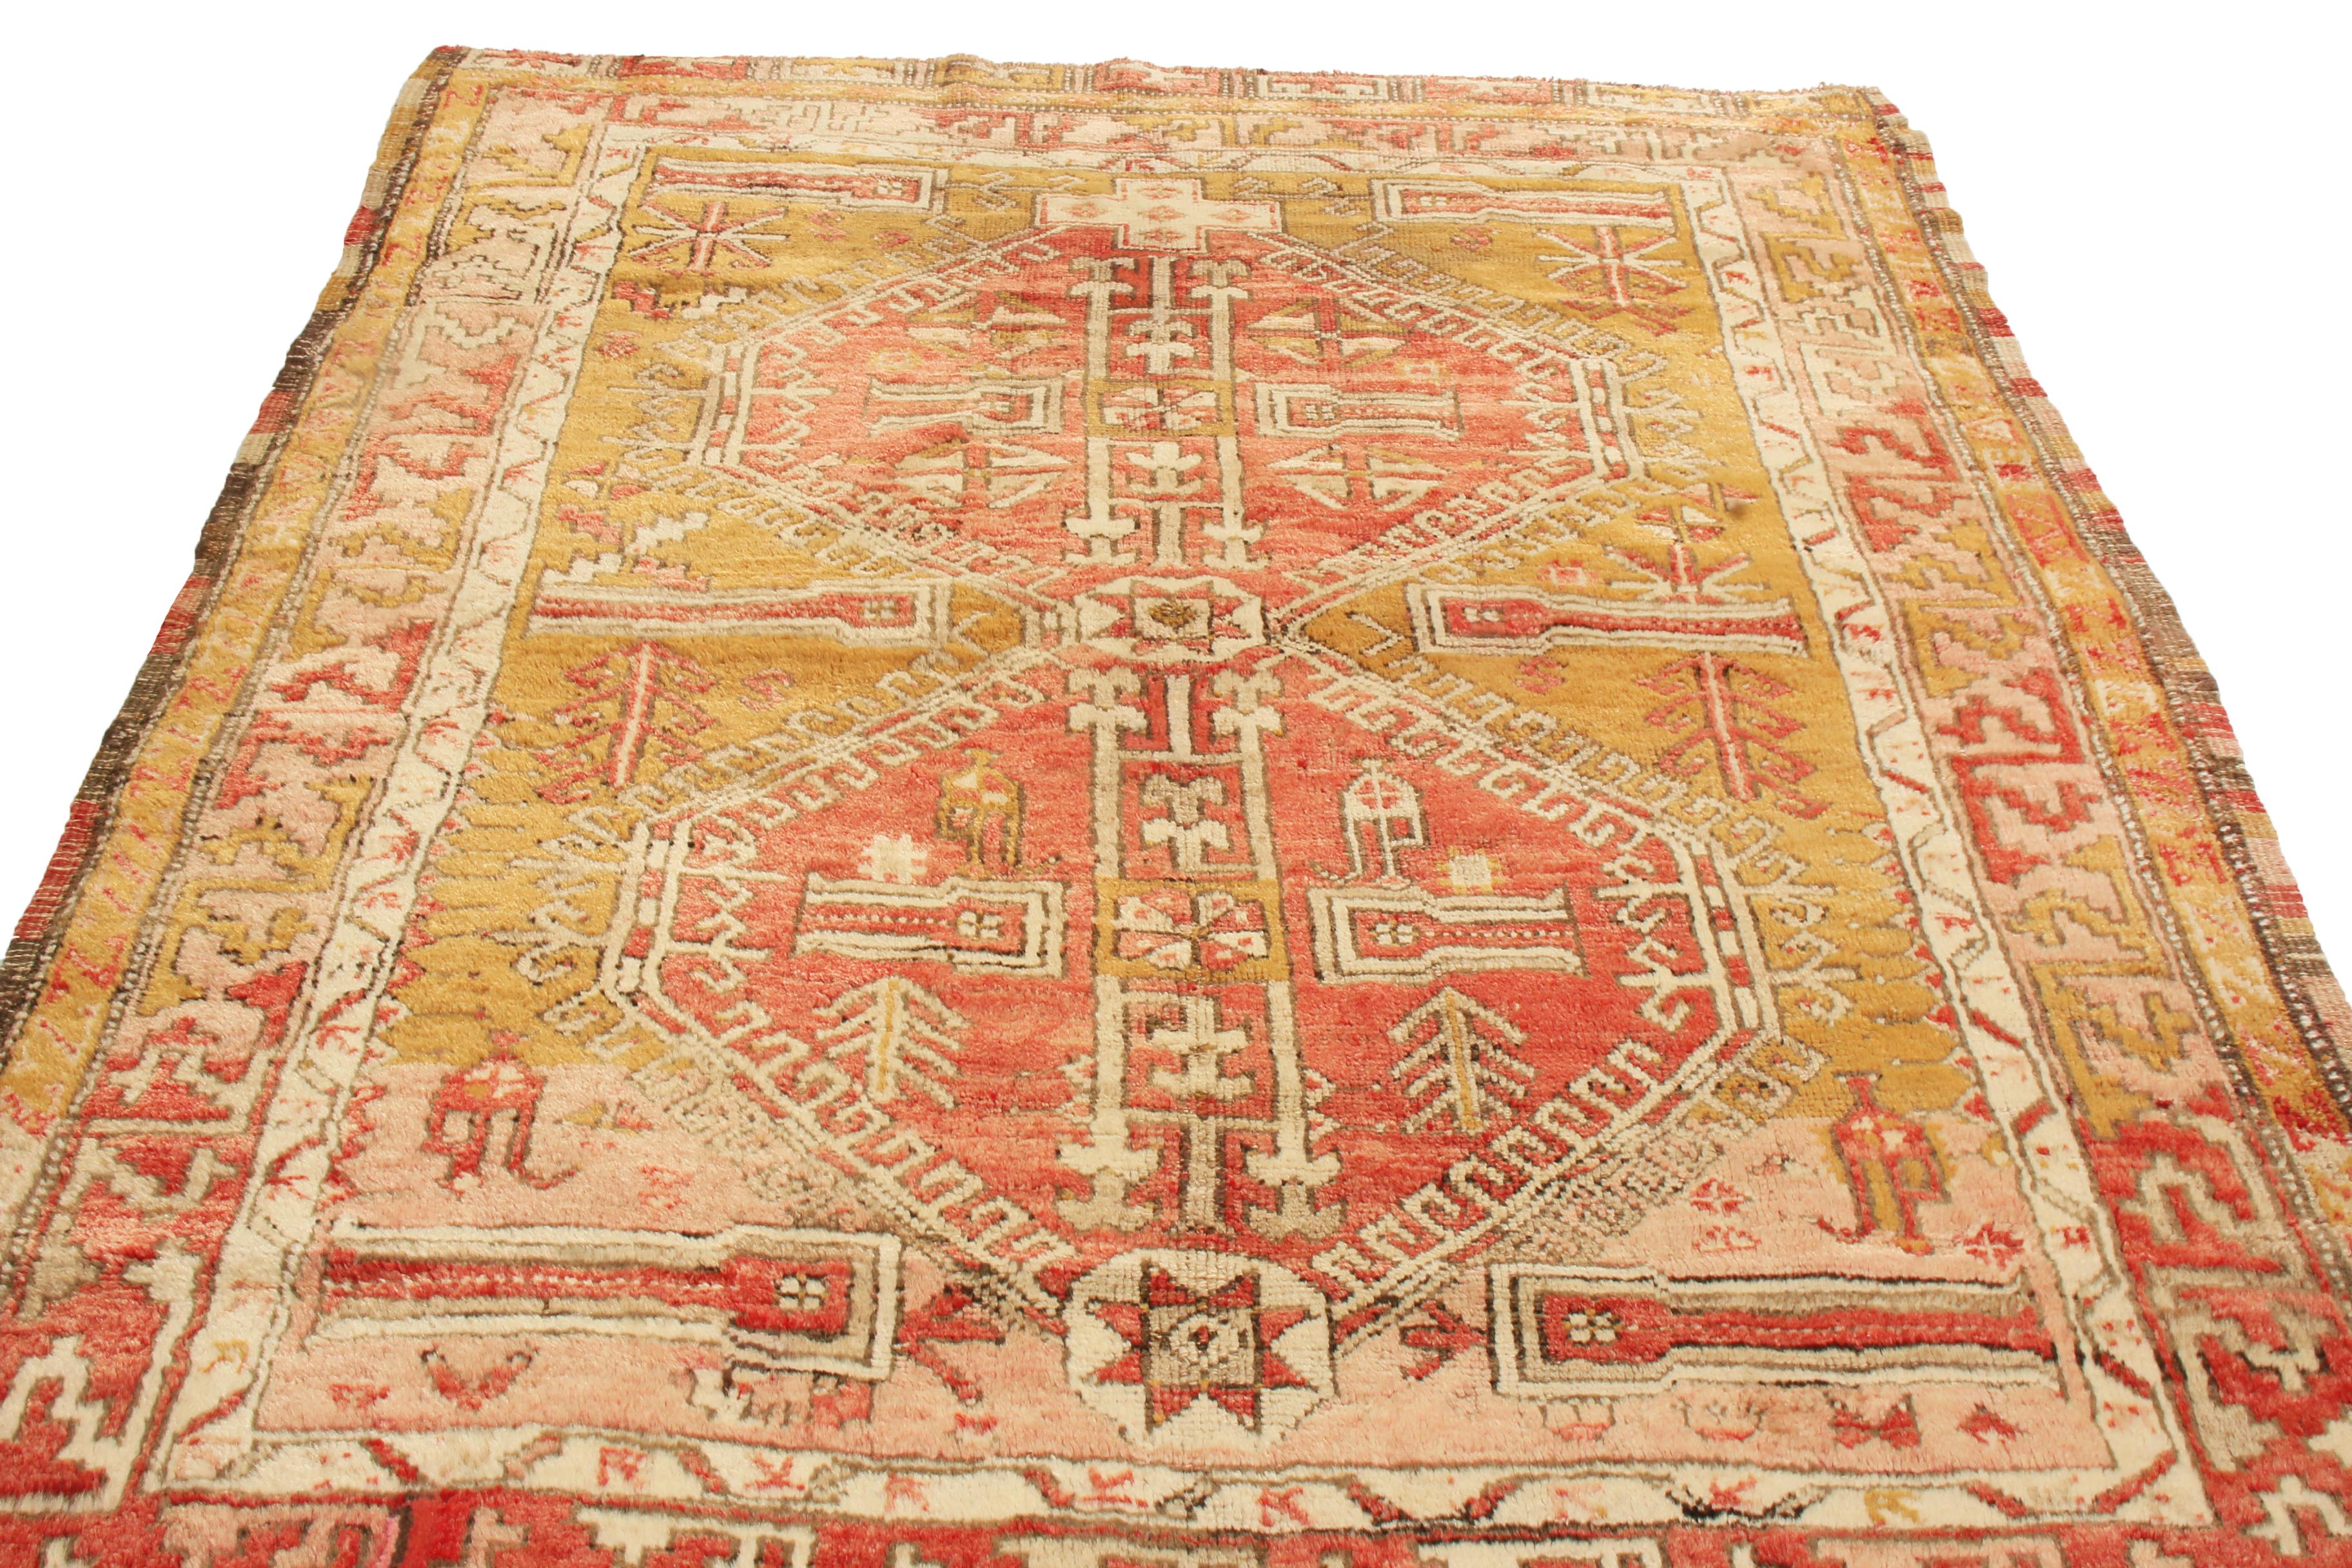 Originating from Turkey in 1910, this antique traditional Oushak wool rug was hand knotted in high quality wool with a variety of rejuvenating and maternal symbols. Woven in a pallet of rustic red and pink against a deep golden-yellow background,